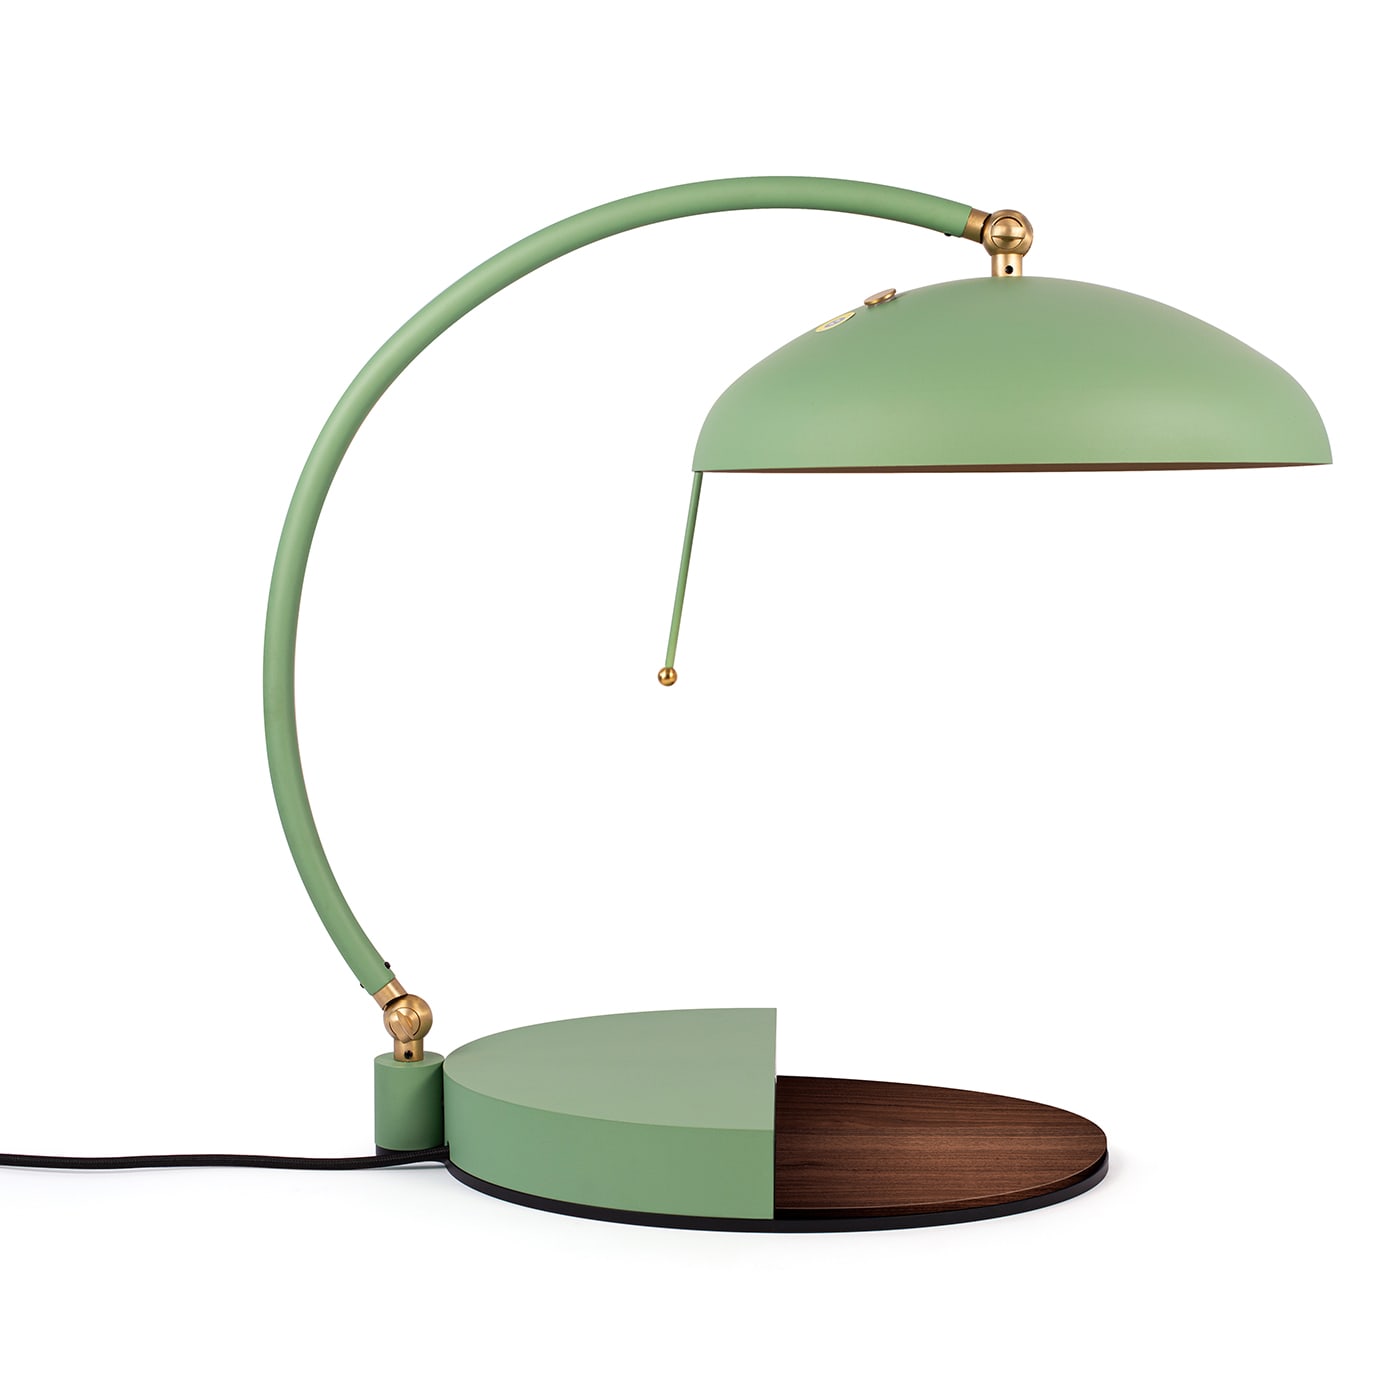 Serena Ministeriale Green Table Lamp with Walnut Wood Details - Codega